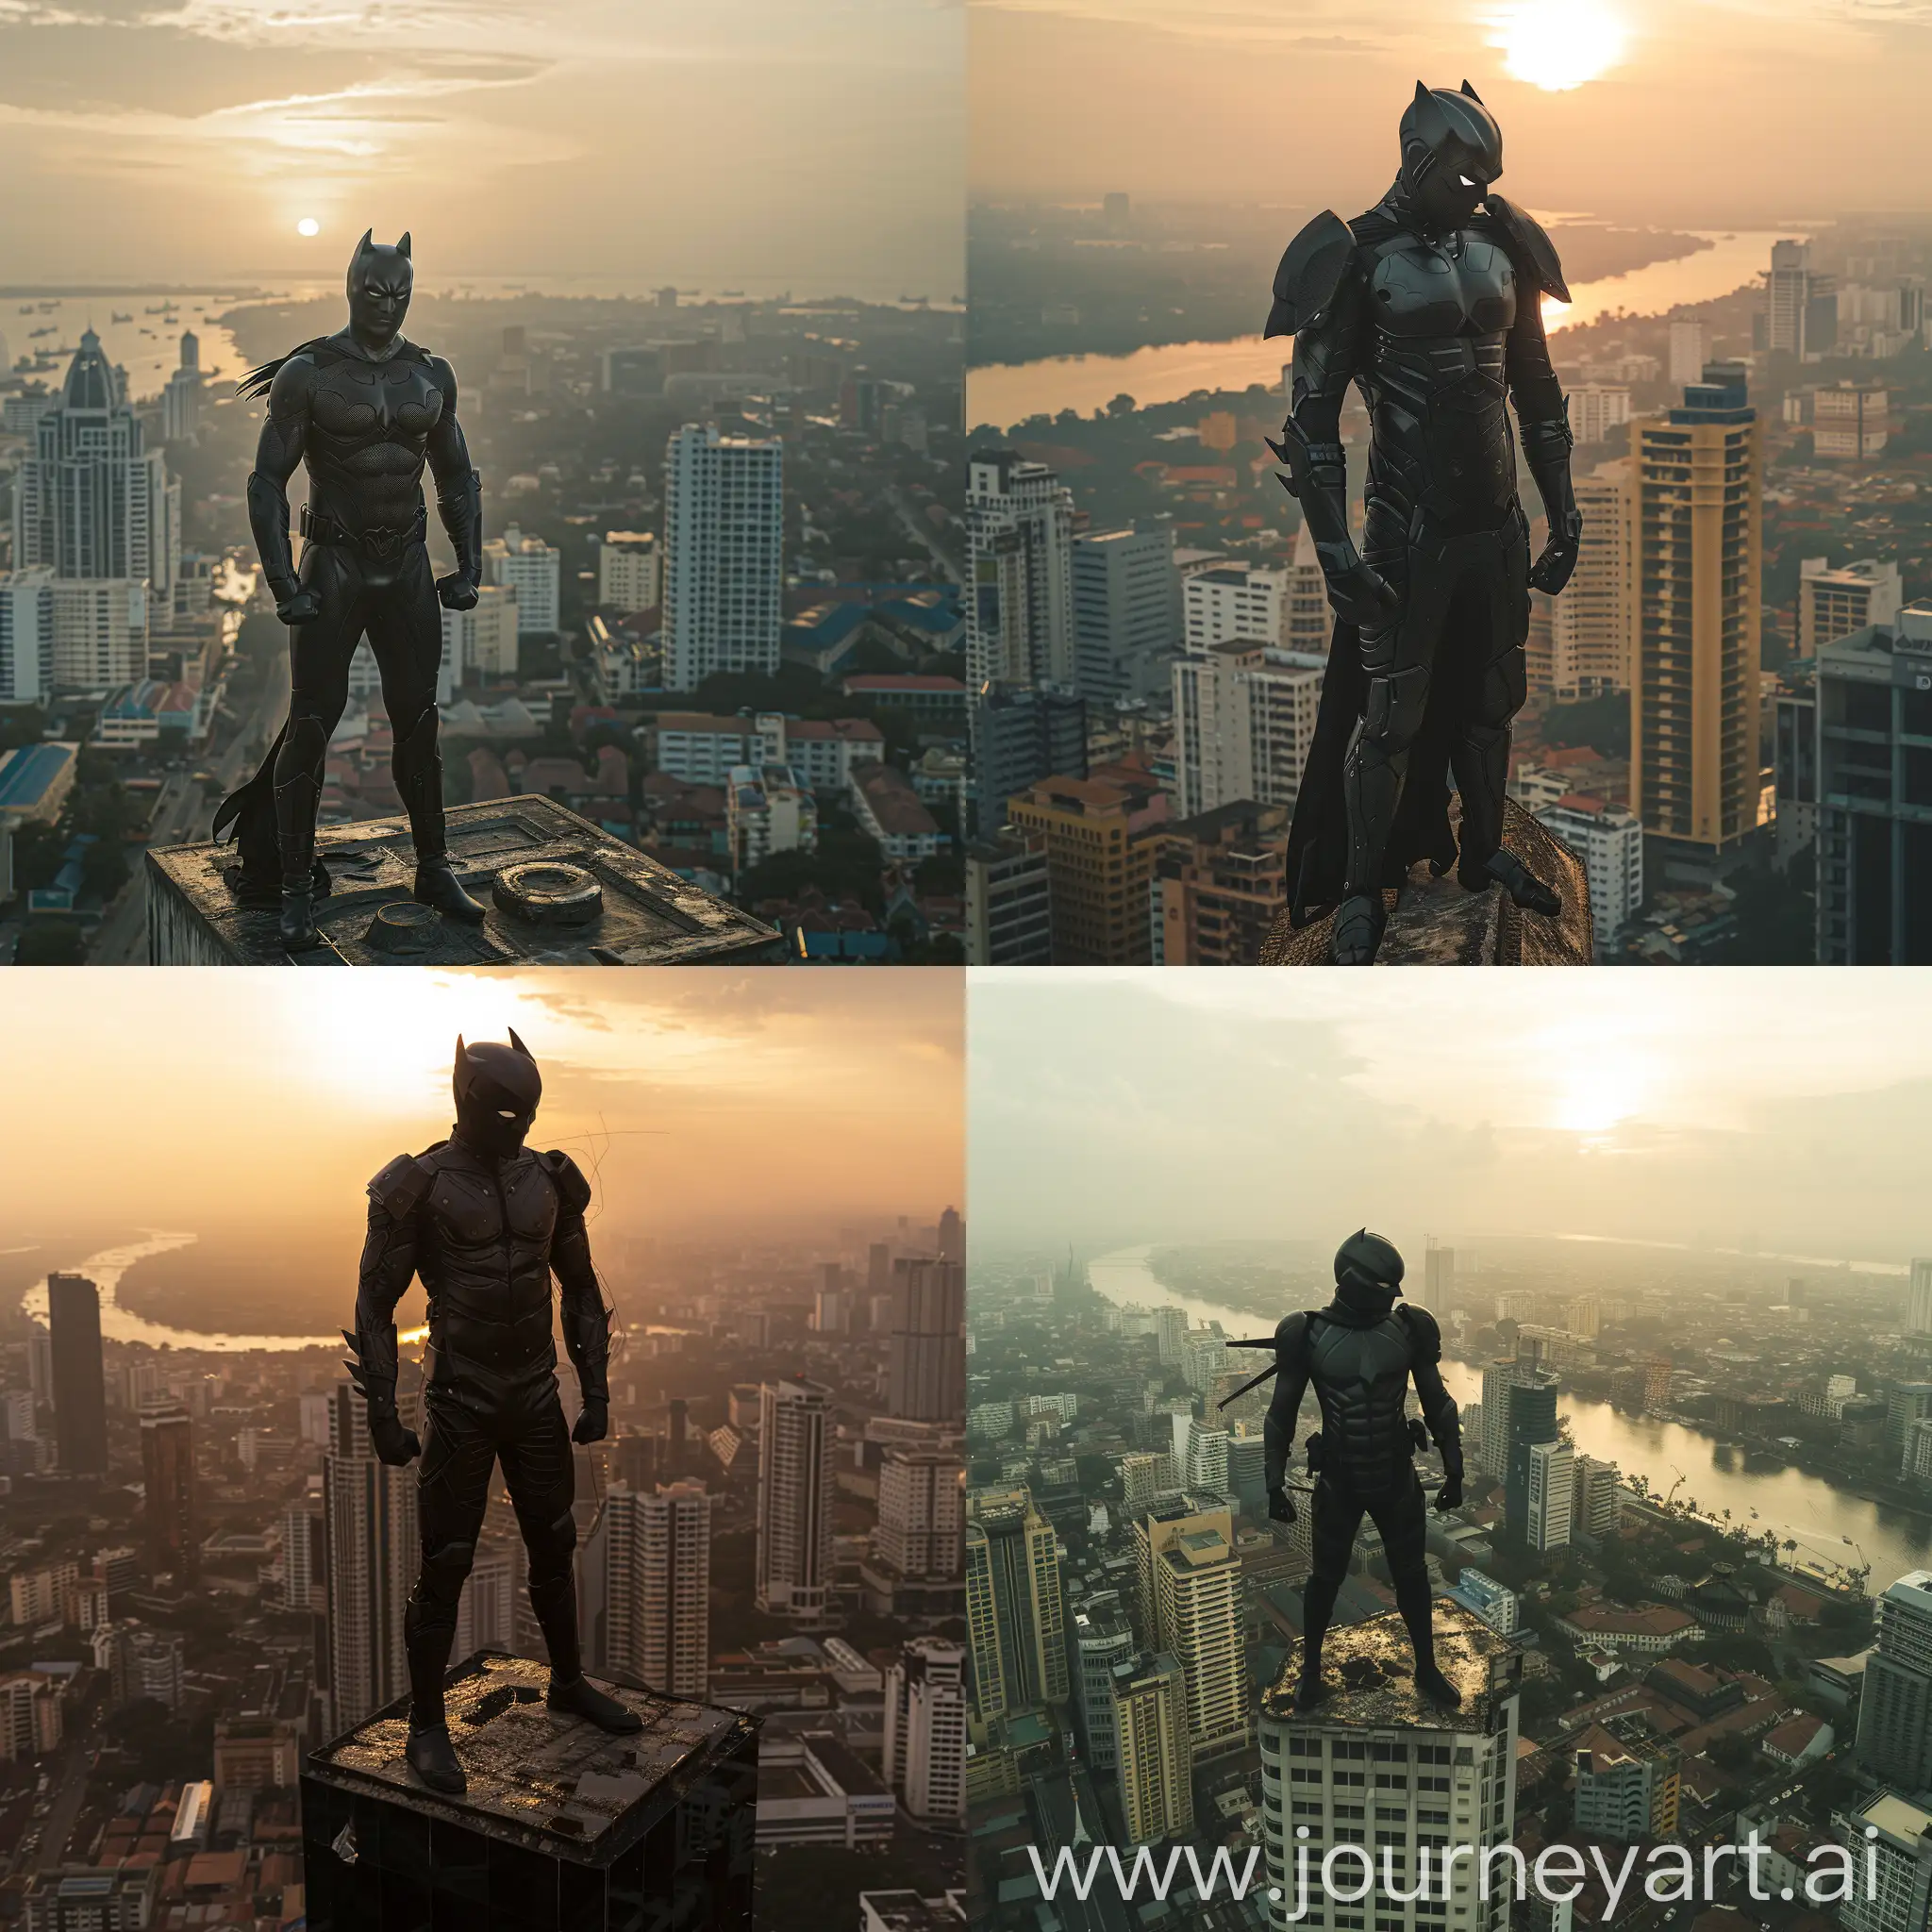 Amidst the bustling streets of Colombo, the Western Warrior stands atop a high-rise building, the city skyline stretching out before him. In the midst of his ongoing battle against crime, he pauses for a moment of reflection, the wind whipping through his sleek black costume and mask. As the sun sets on the horizon, casting a golden glow over the city below, the Western Warrior prepares to continue his journey, ready to face whatever challenges lie ahead